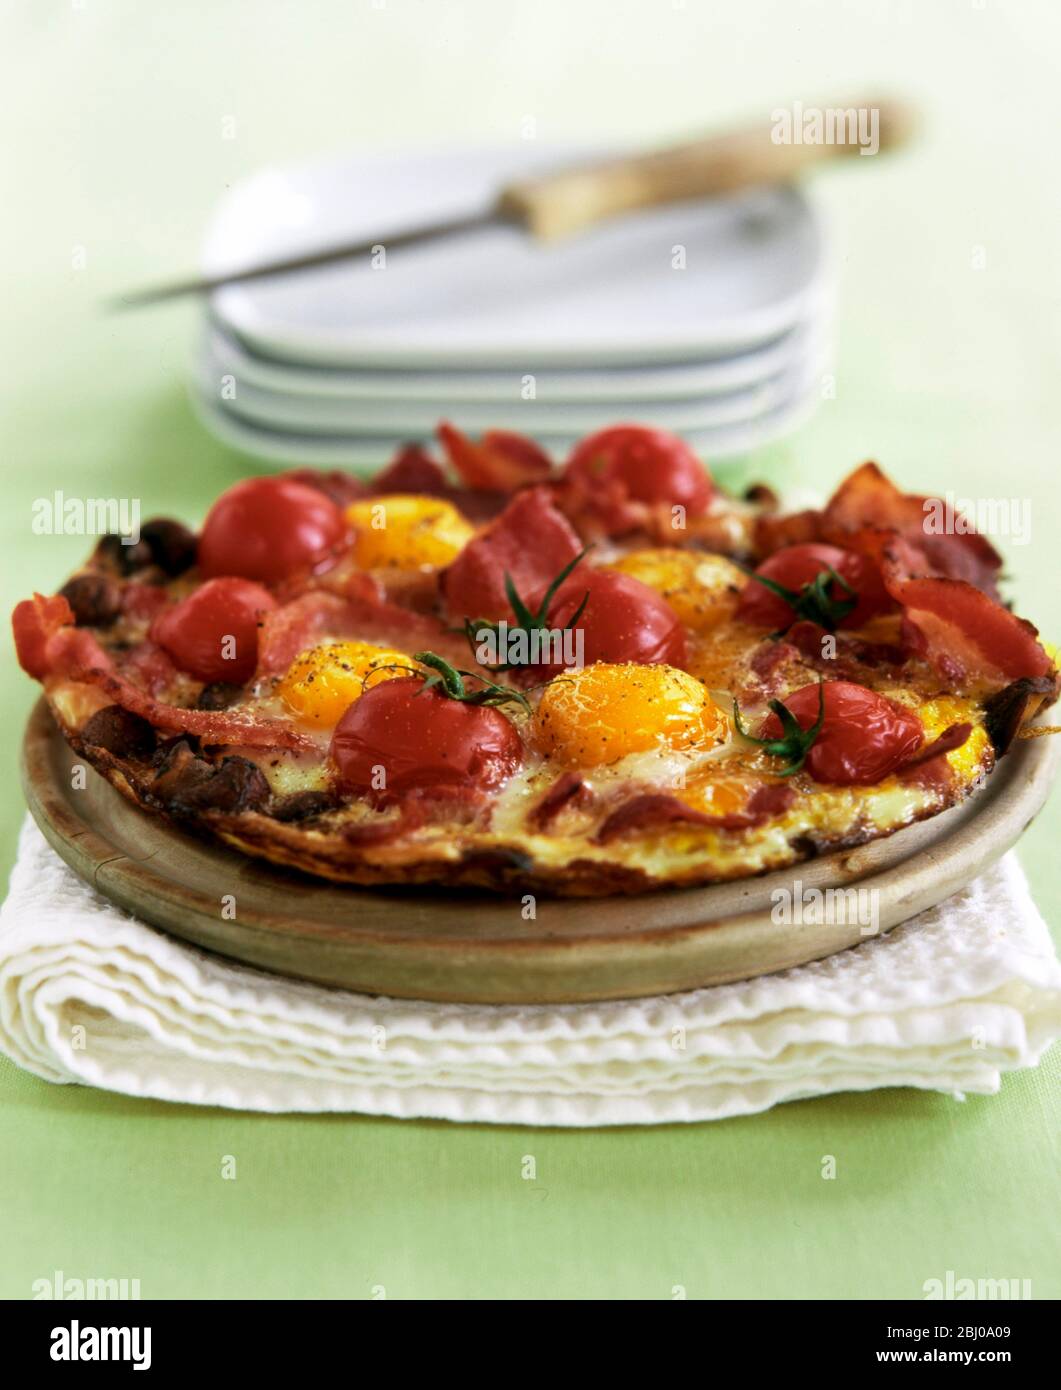 A brunch dish of an open omelette with pizza style toppings. Stock Photo